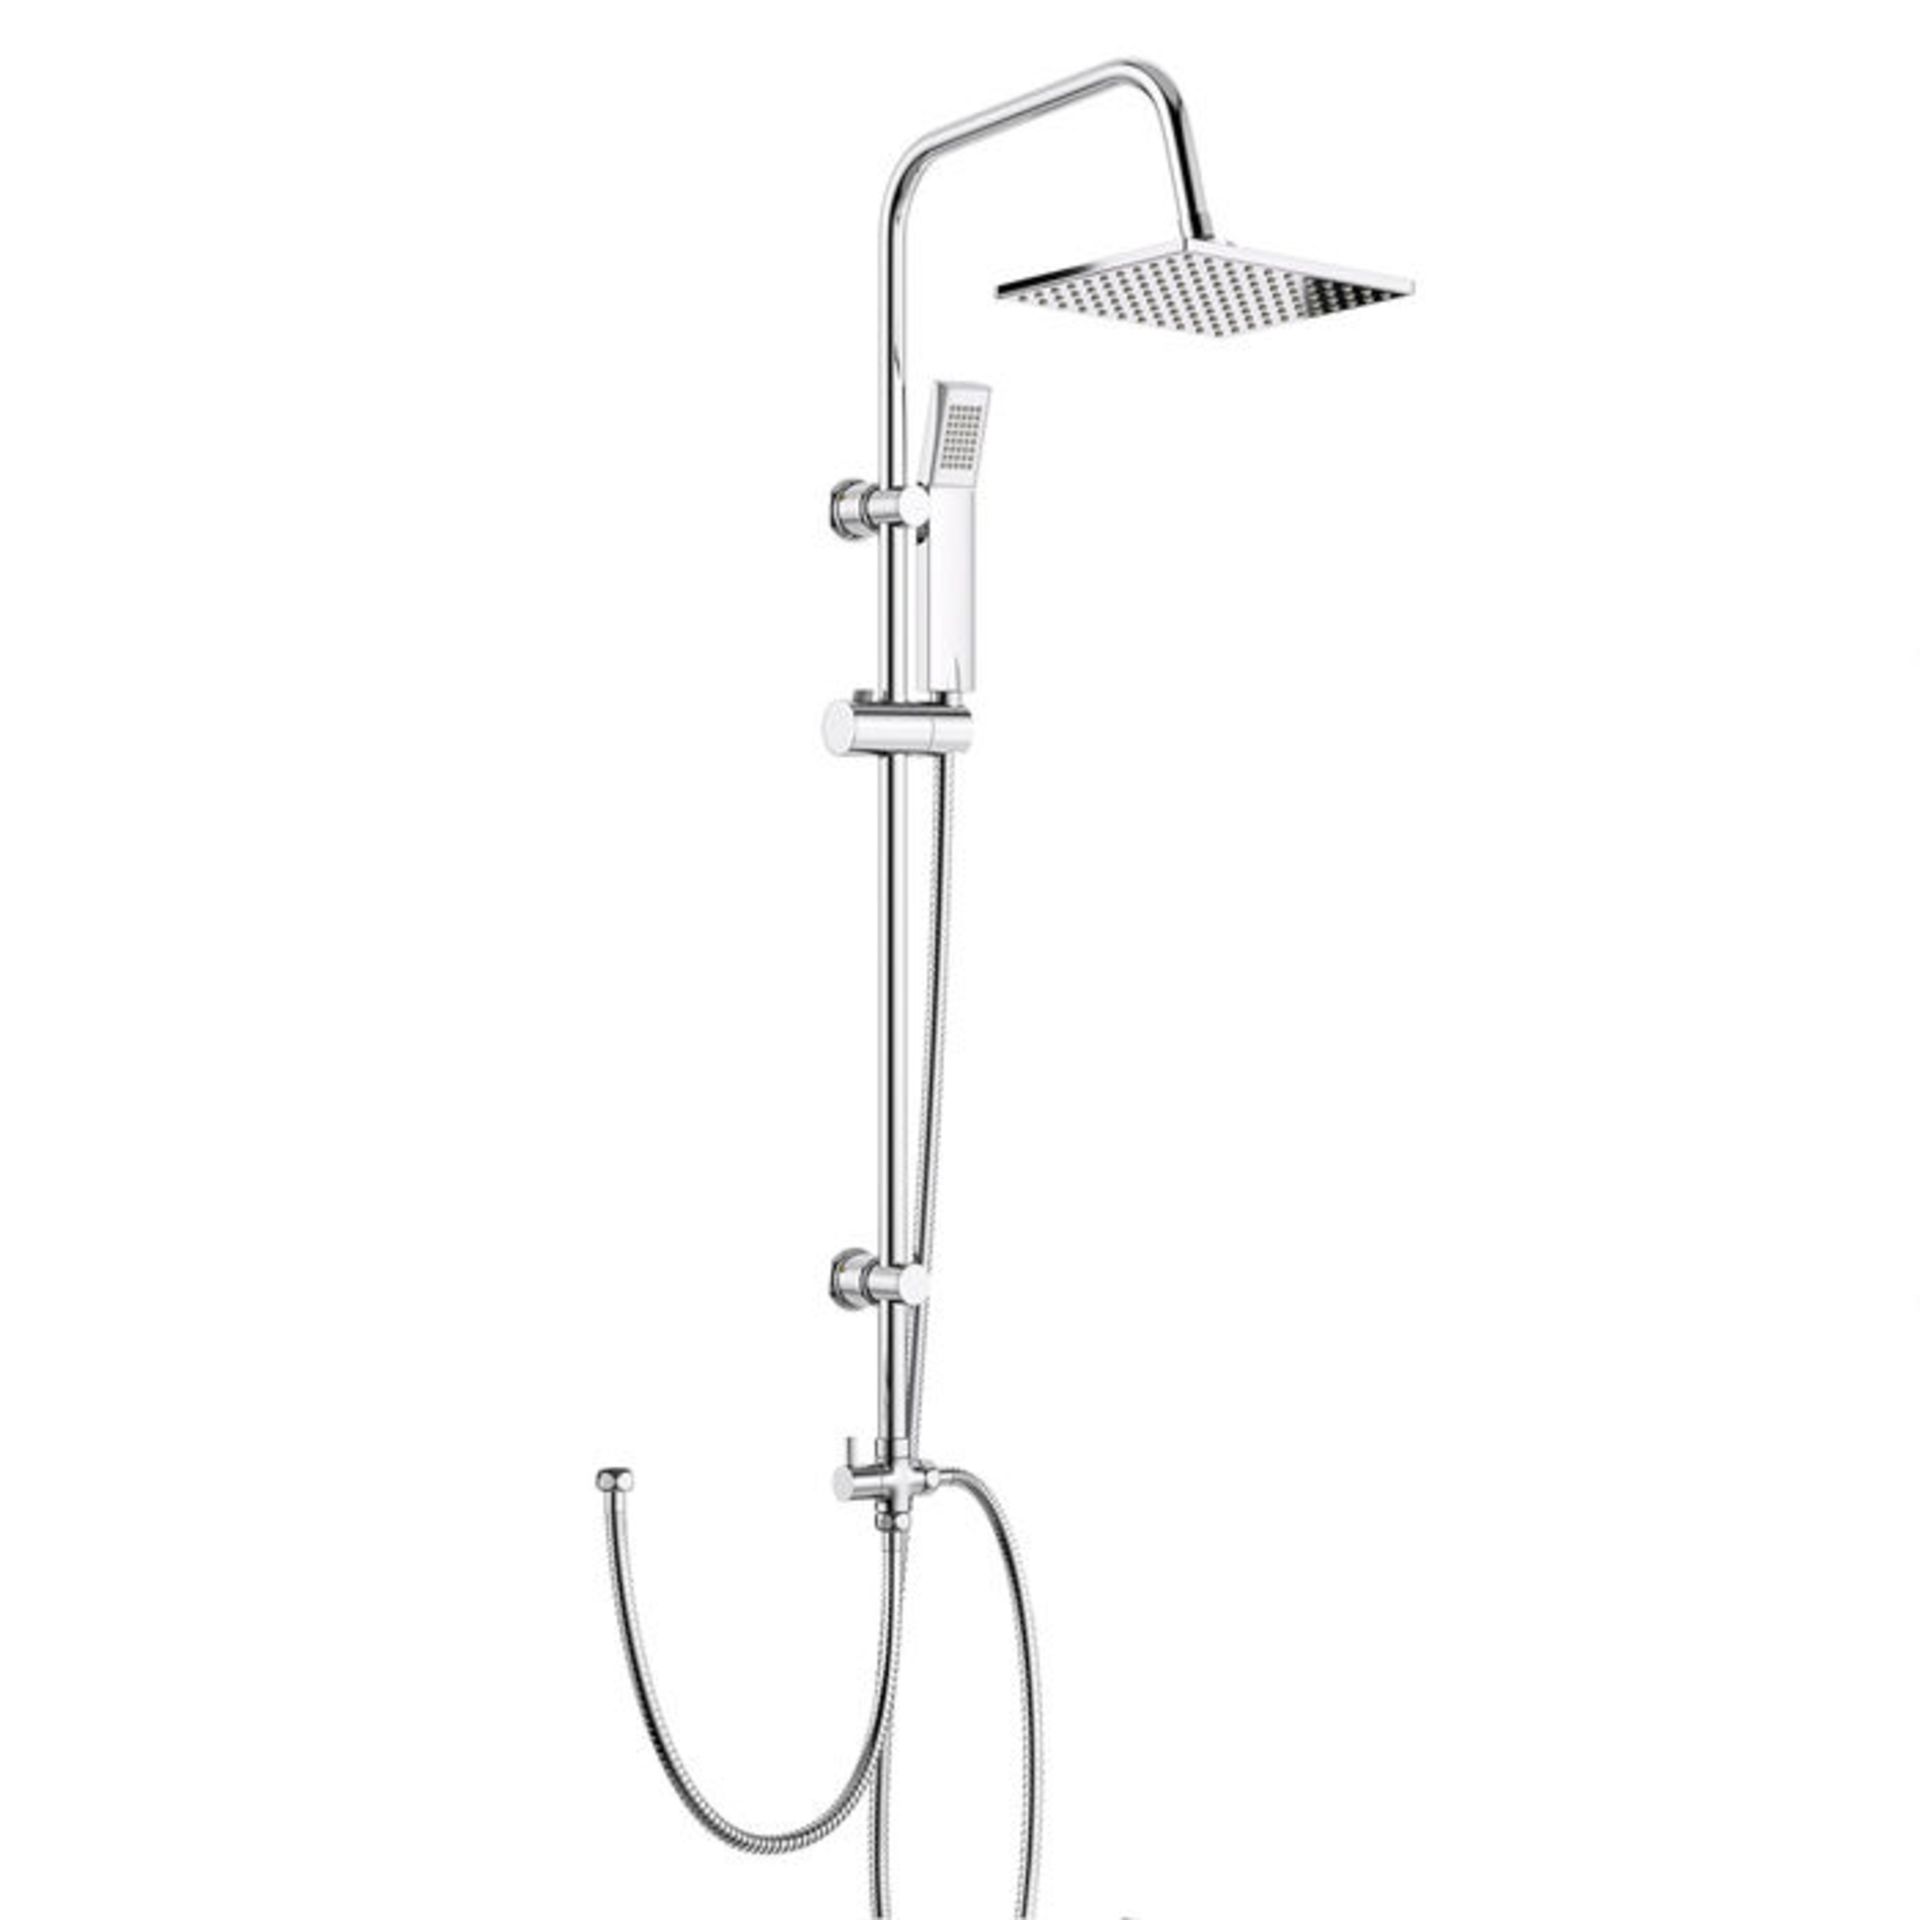 (AA118) 200mm Square Head, Riser Rail & Handheld Kit. Quality stainless steel shower head with - Image 2 of 2